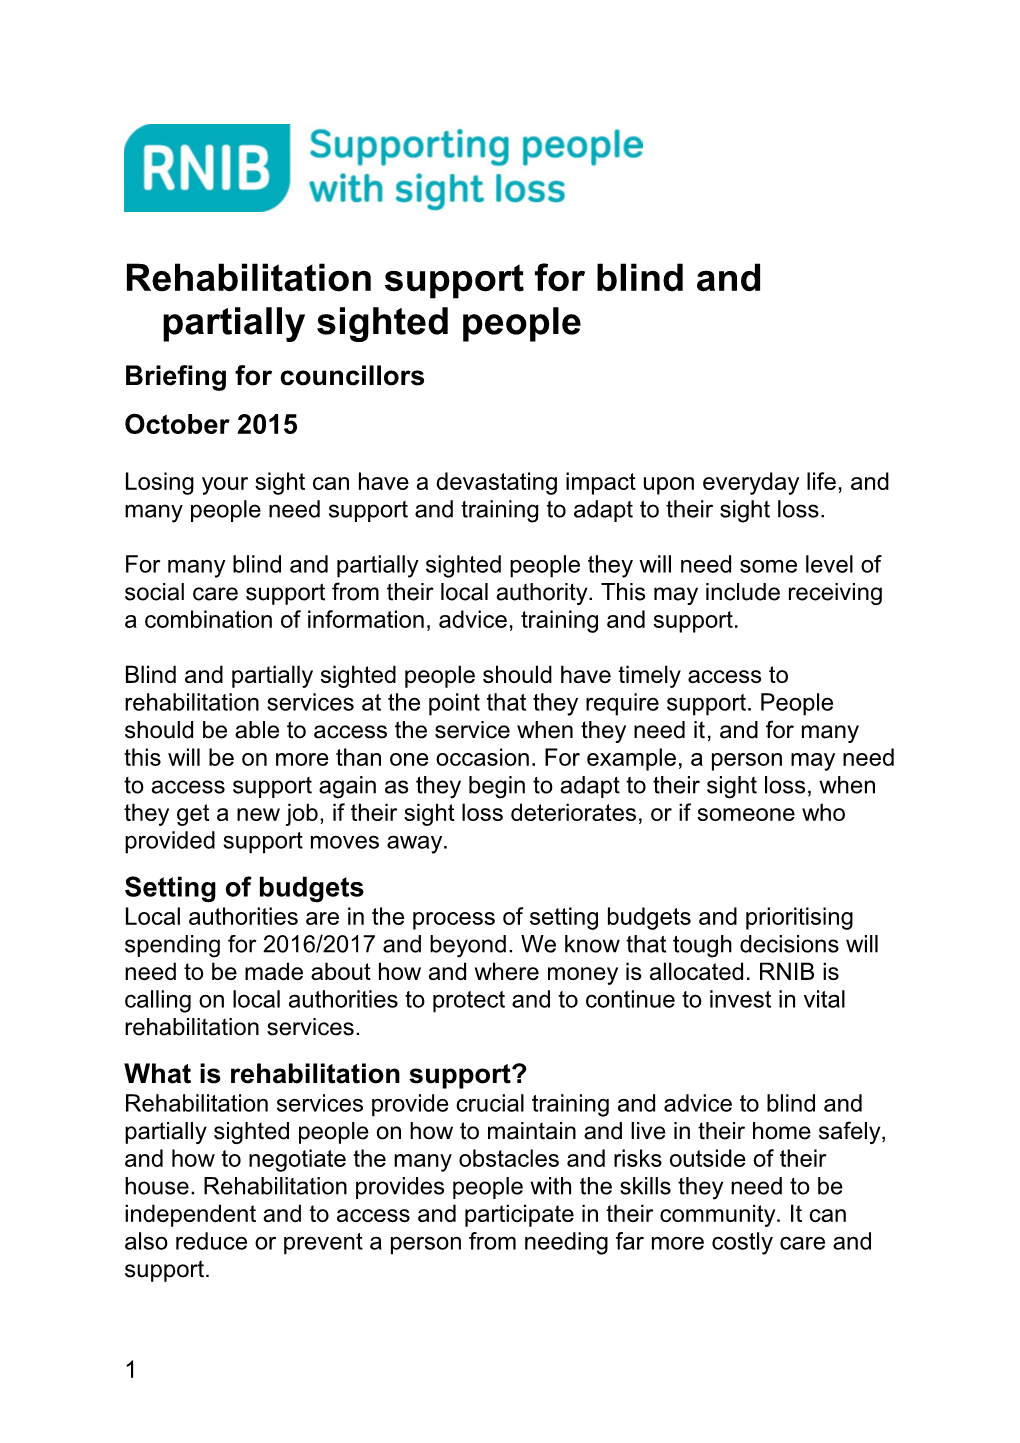 Rehabilitation Support for Blind and Partially Sighted People